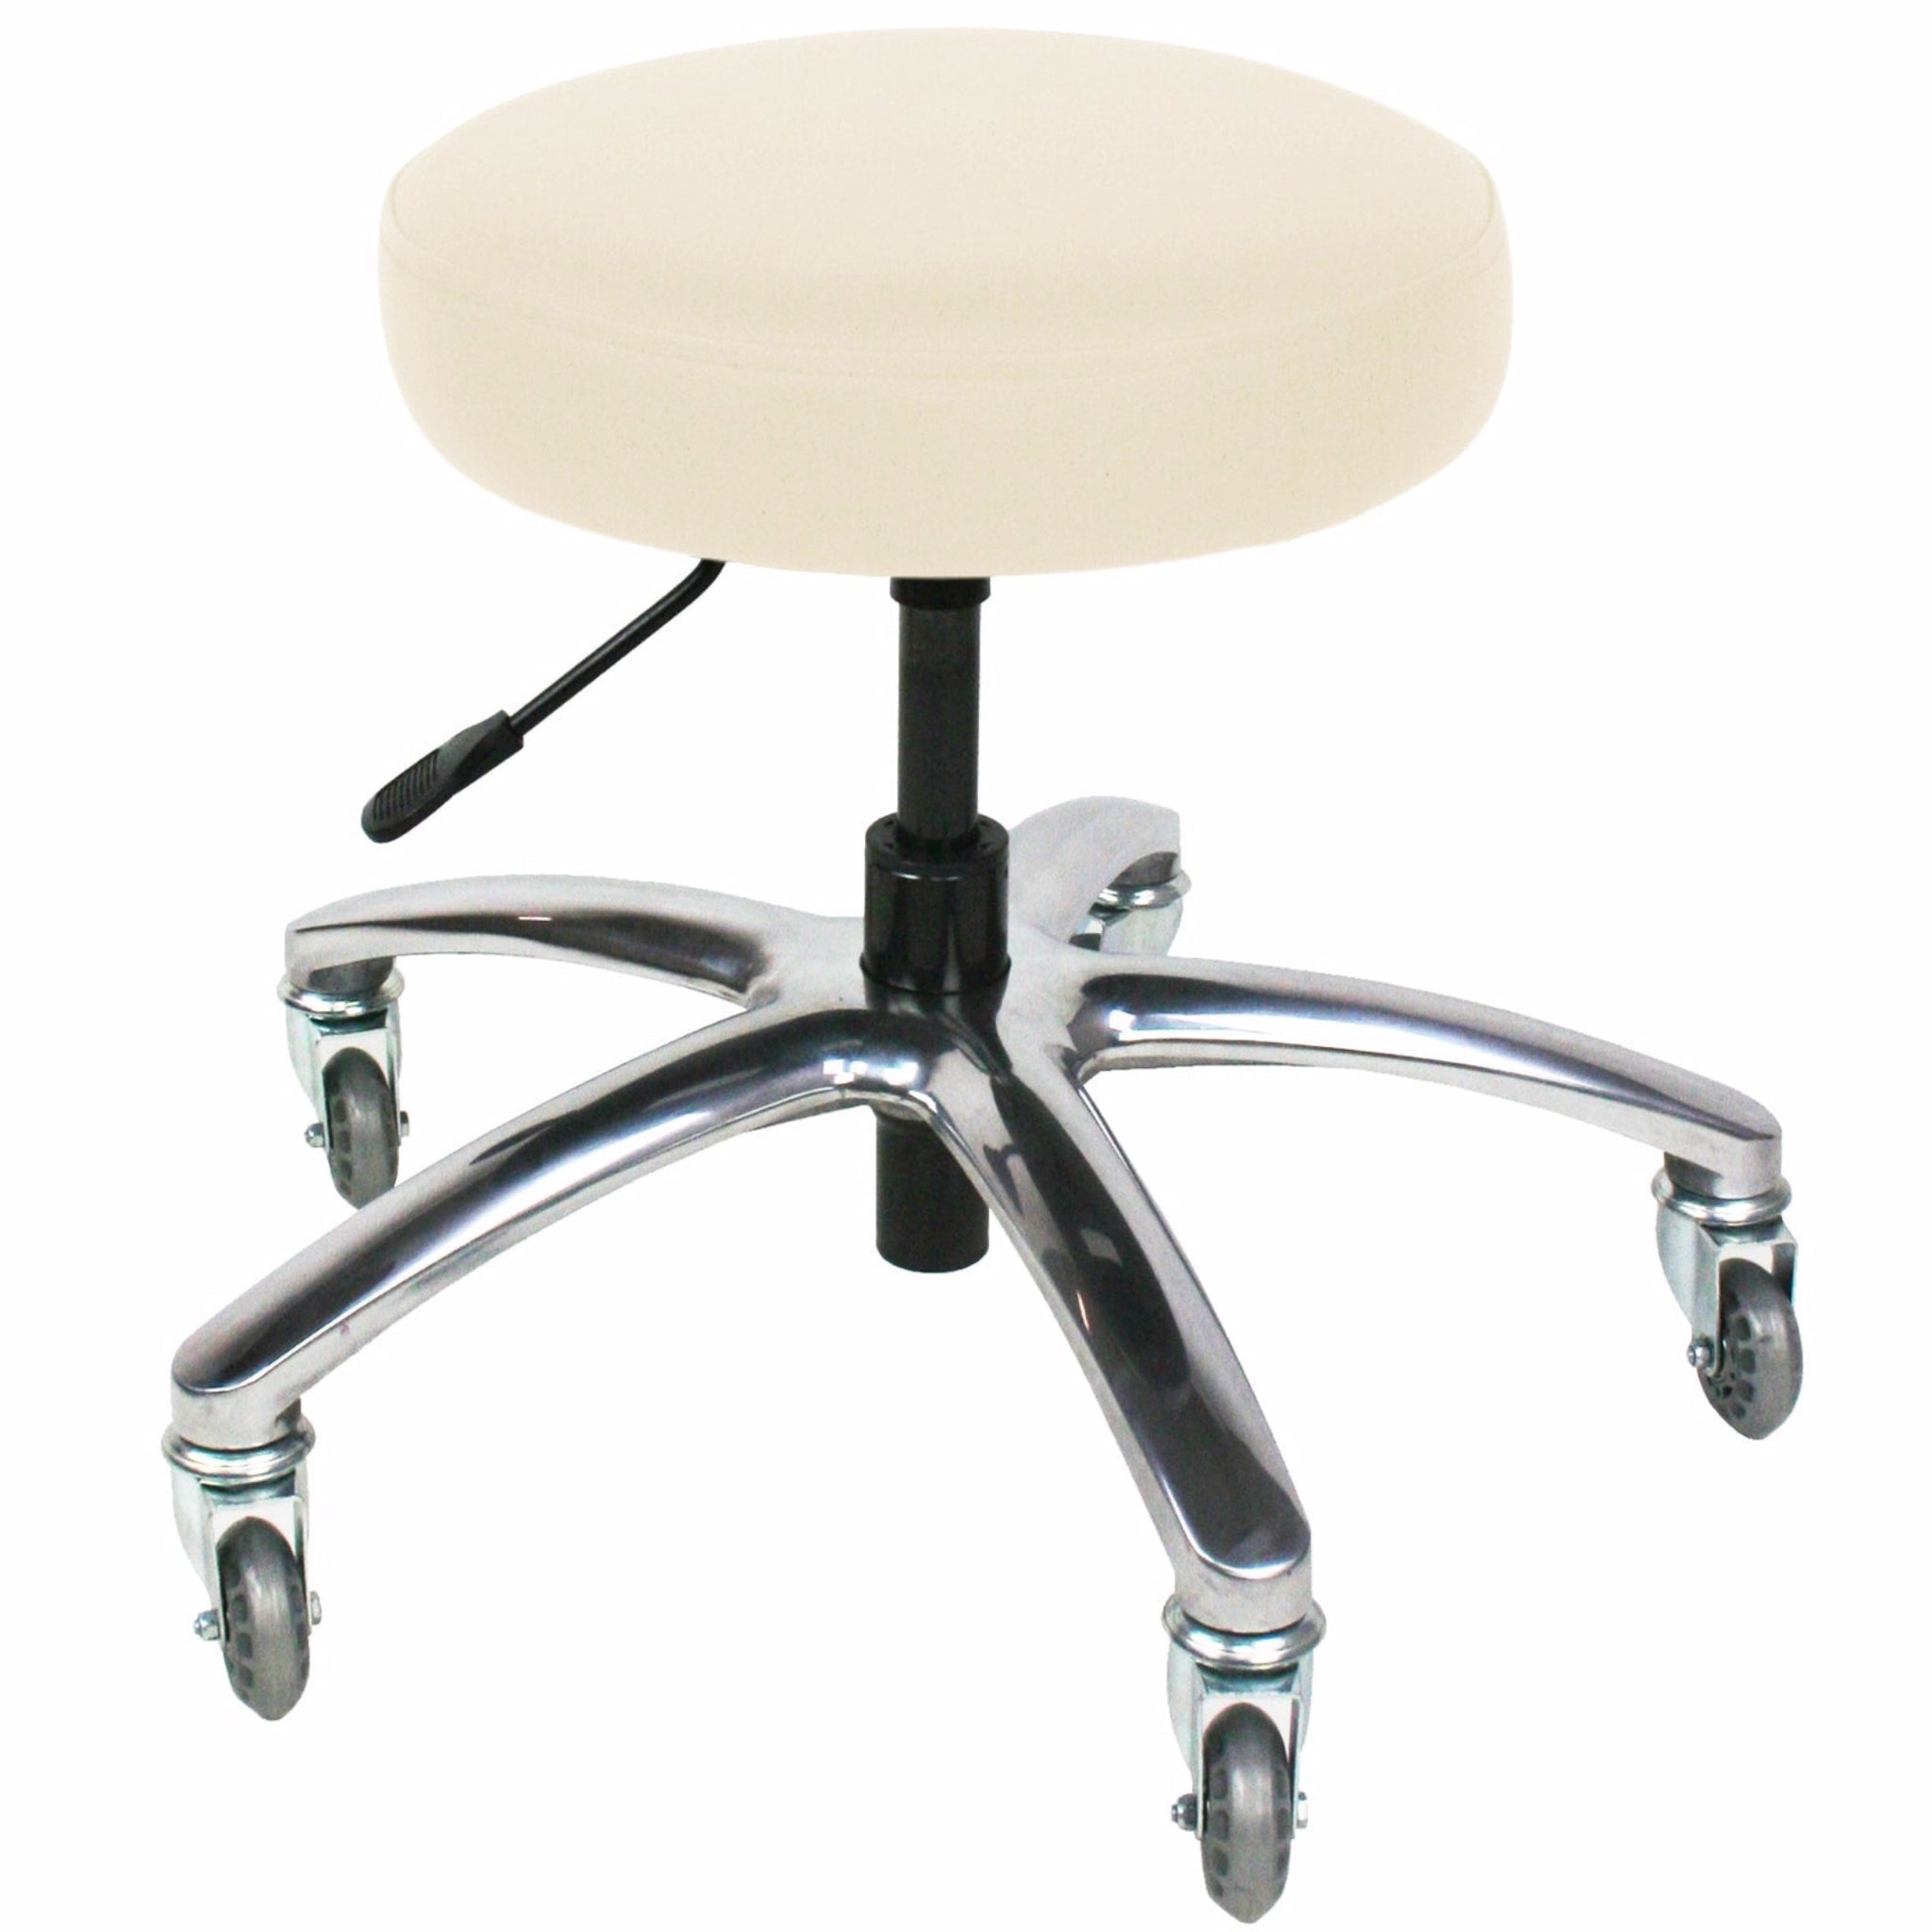 Low Roller Seat Stool Round Sturdy Heavy Duty Small Low Height